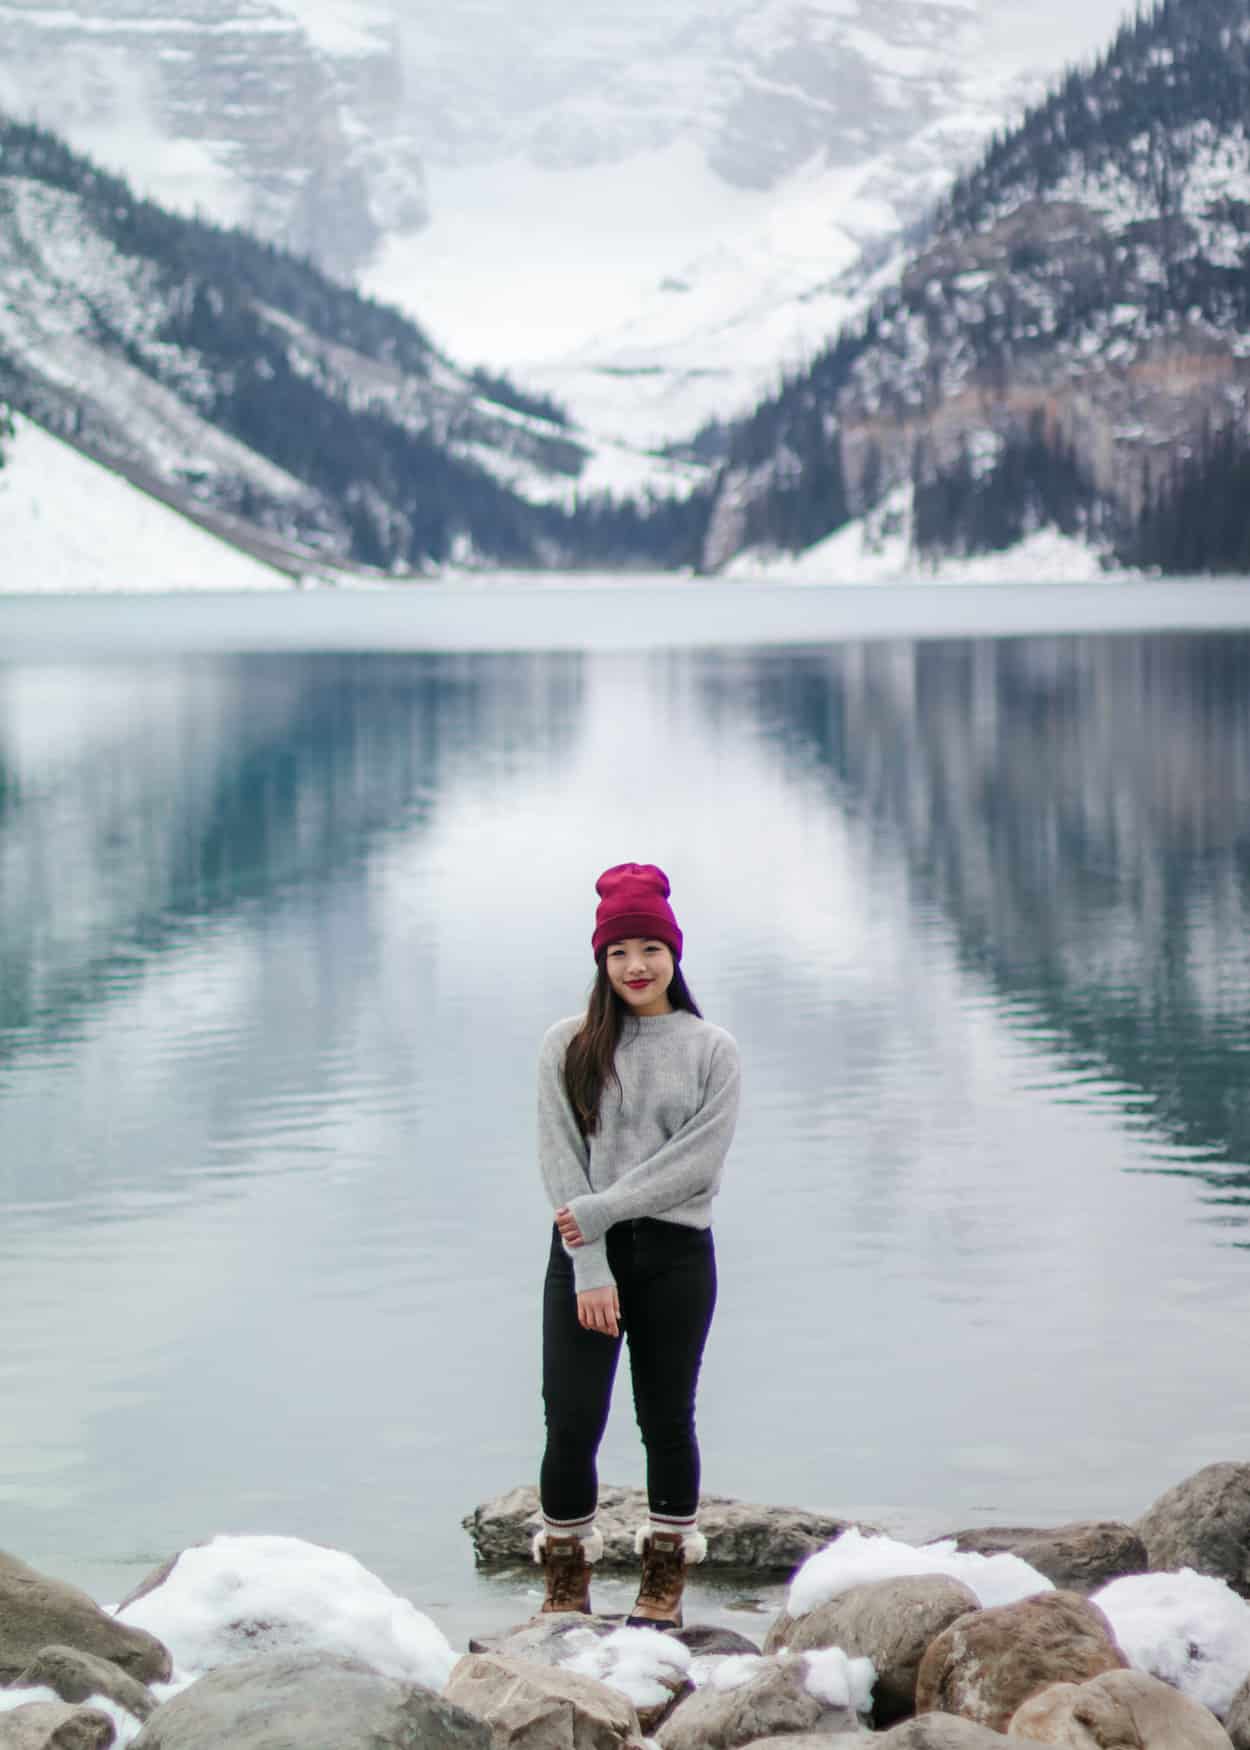 Top things to do in Jasper and Banff National Park in Banff, Alberta in the winter | Banff, Alberta travel guide | what to do in Jasper & Banff, Canada | best Banff travel itinerary | best places to visit in Canada during the winter | where to go in Canada during the holidays | how to spend 3 days in Banff National Park | Diary of a Toronto Girl, a Toronto lifestyle blog